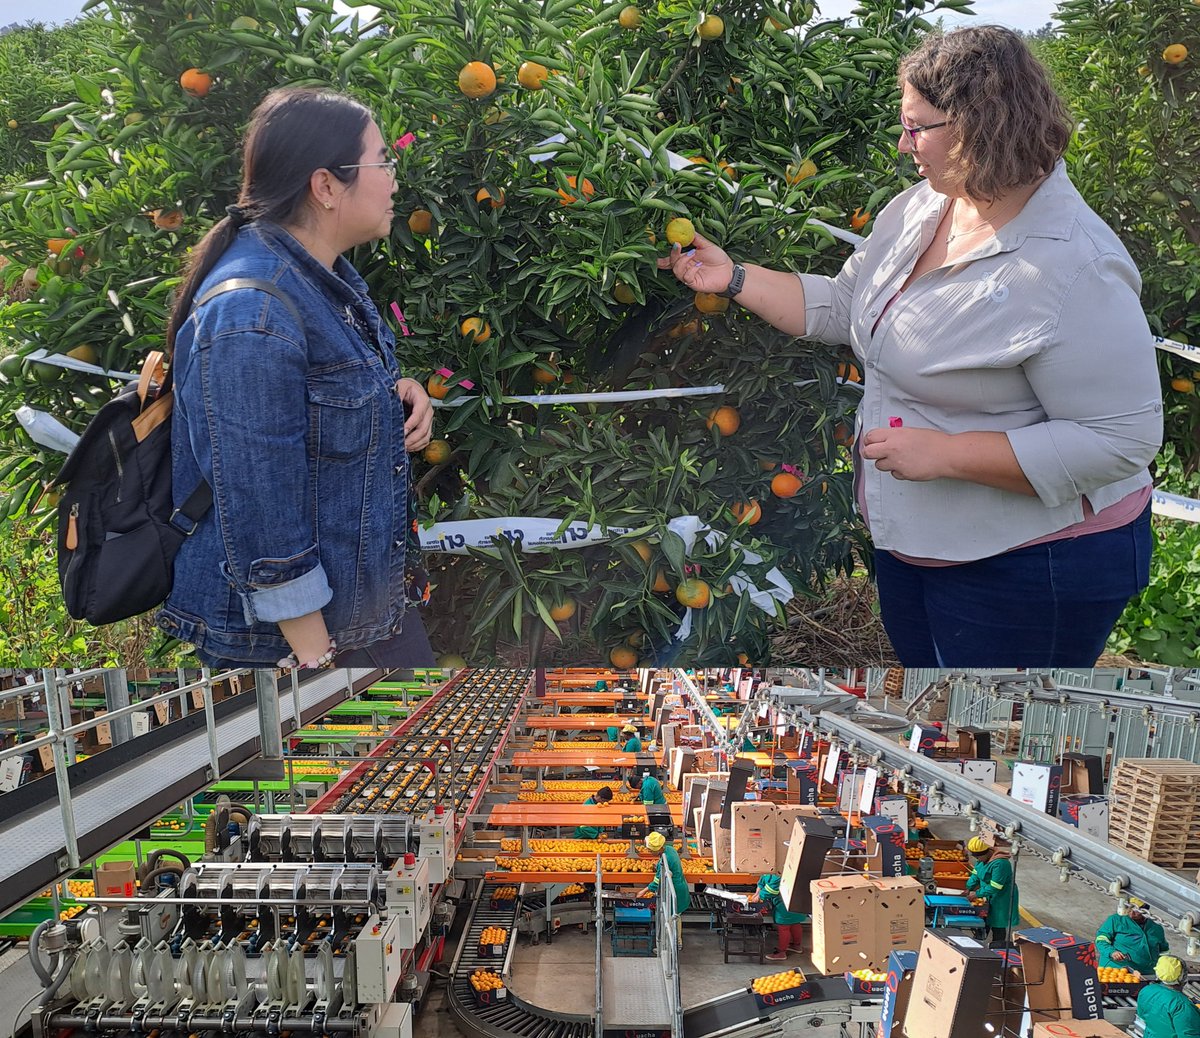 #ResearchStay: 
Cecilia’s #research aims to detect false codling moth in citrus fruit through #aromas. So, we are setting up large field #experiments in South Africa and meeting with the growers and packhouses to identify the main challenges. 
Stay tuned for the results!